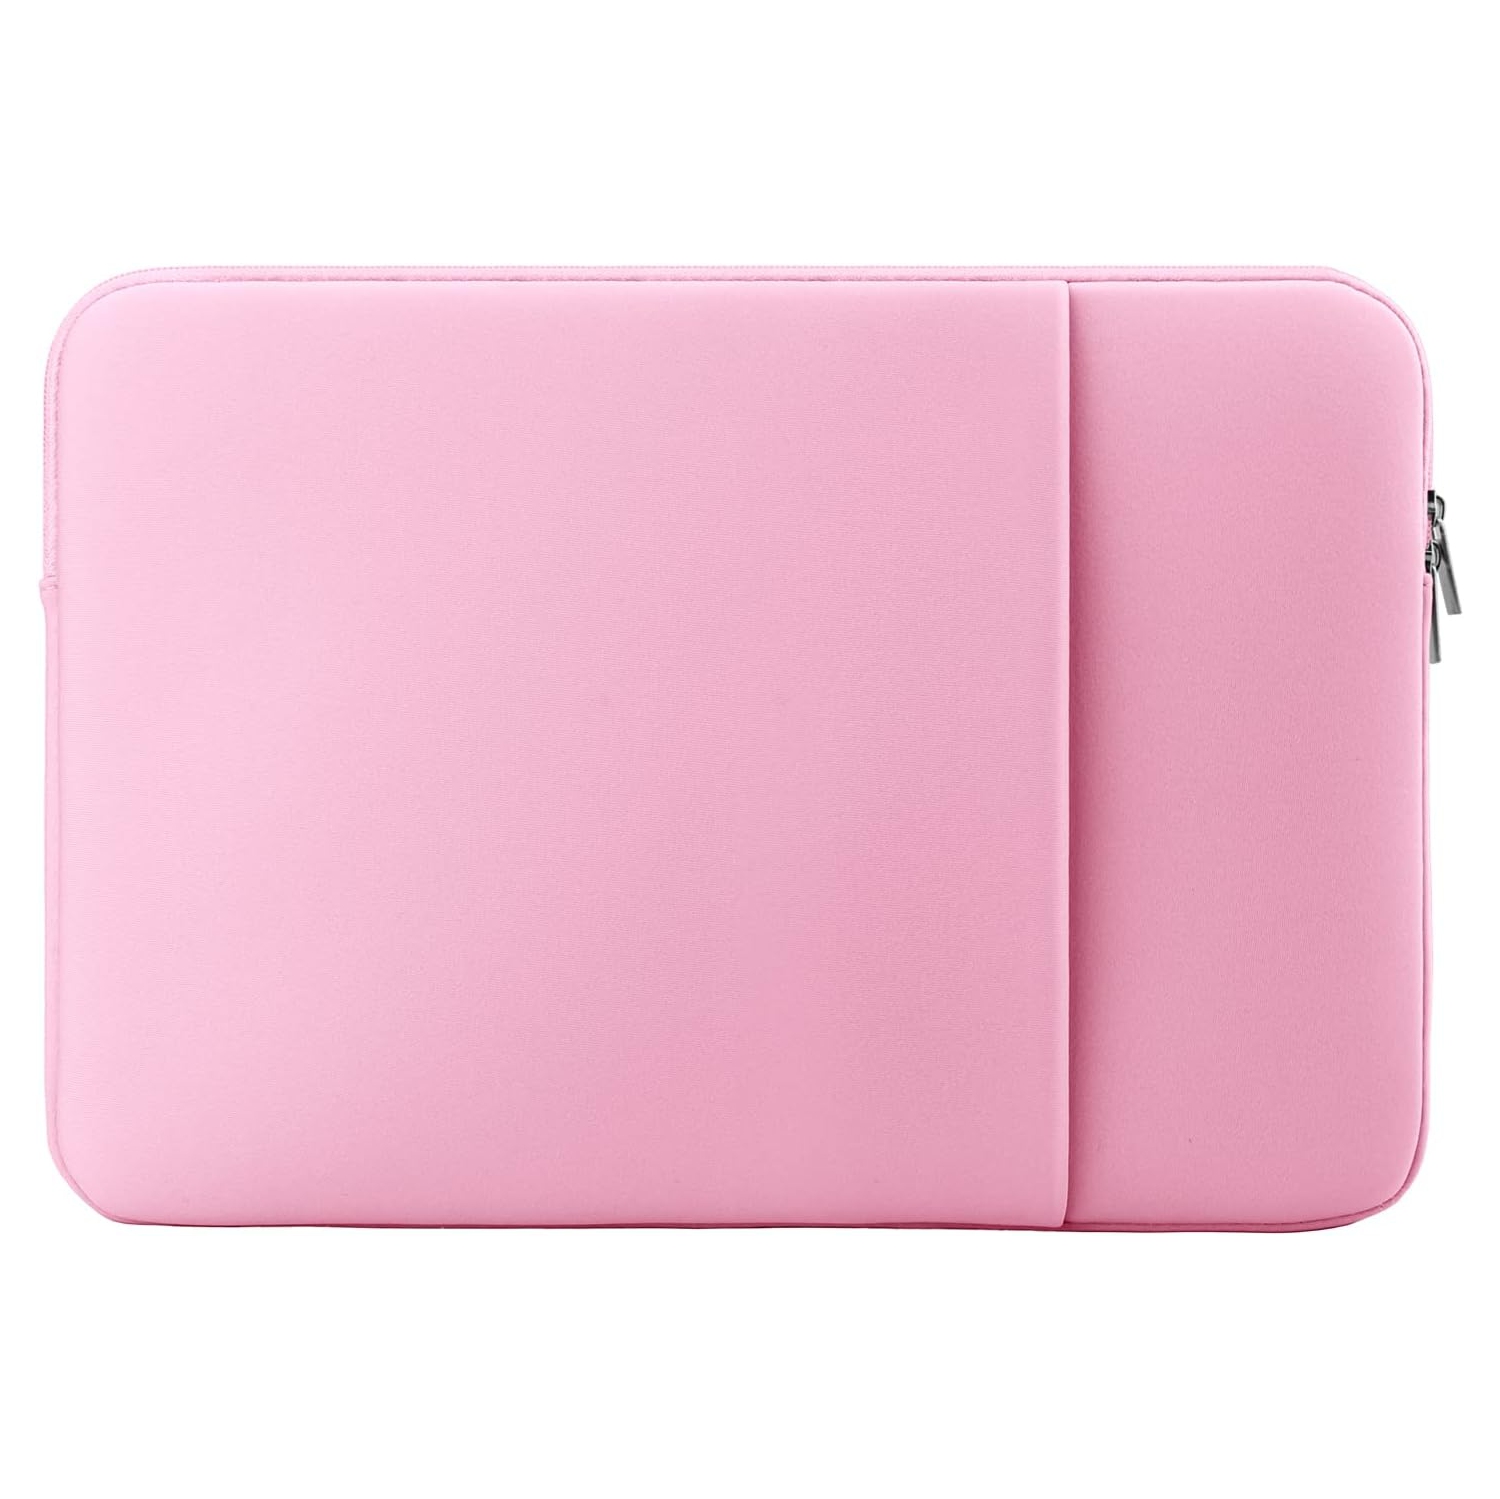 15-15.4 Inch Laptop Sleeve Shockproof Computer Case with Pocket Compatible with 15 Inch MacBook Pro